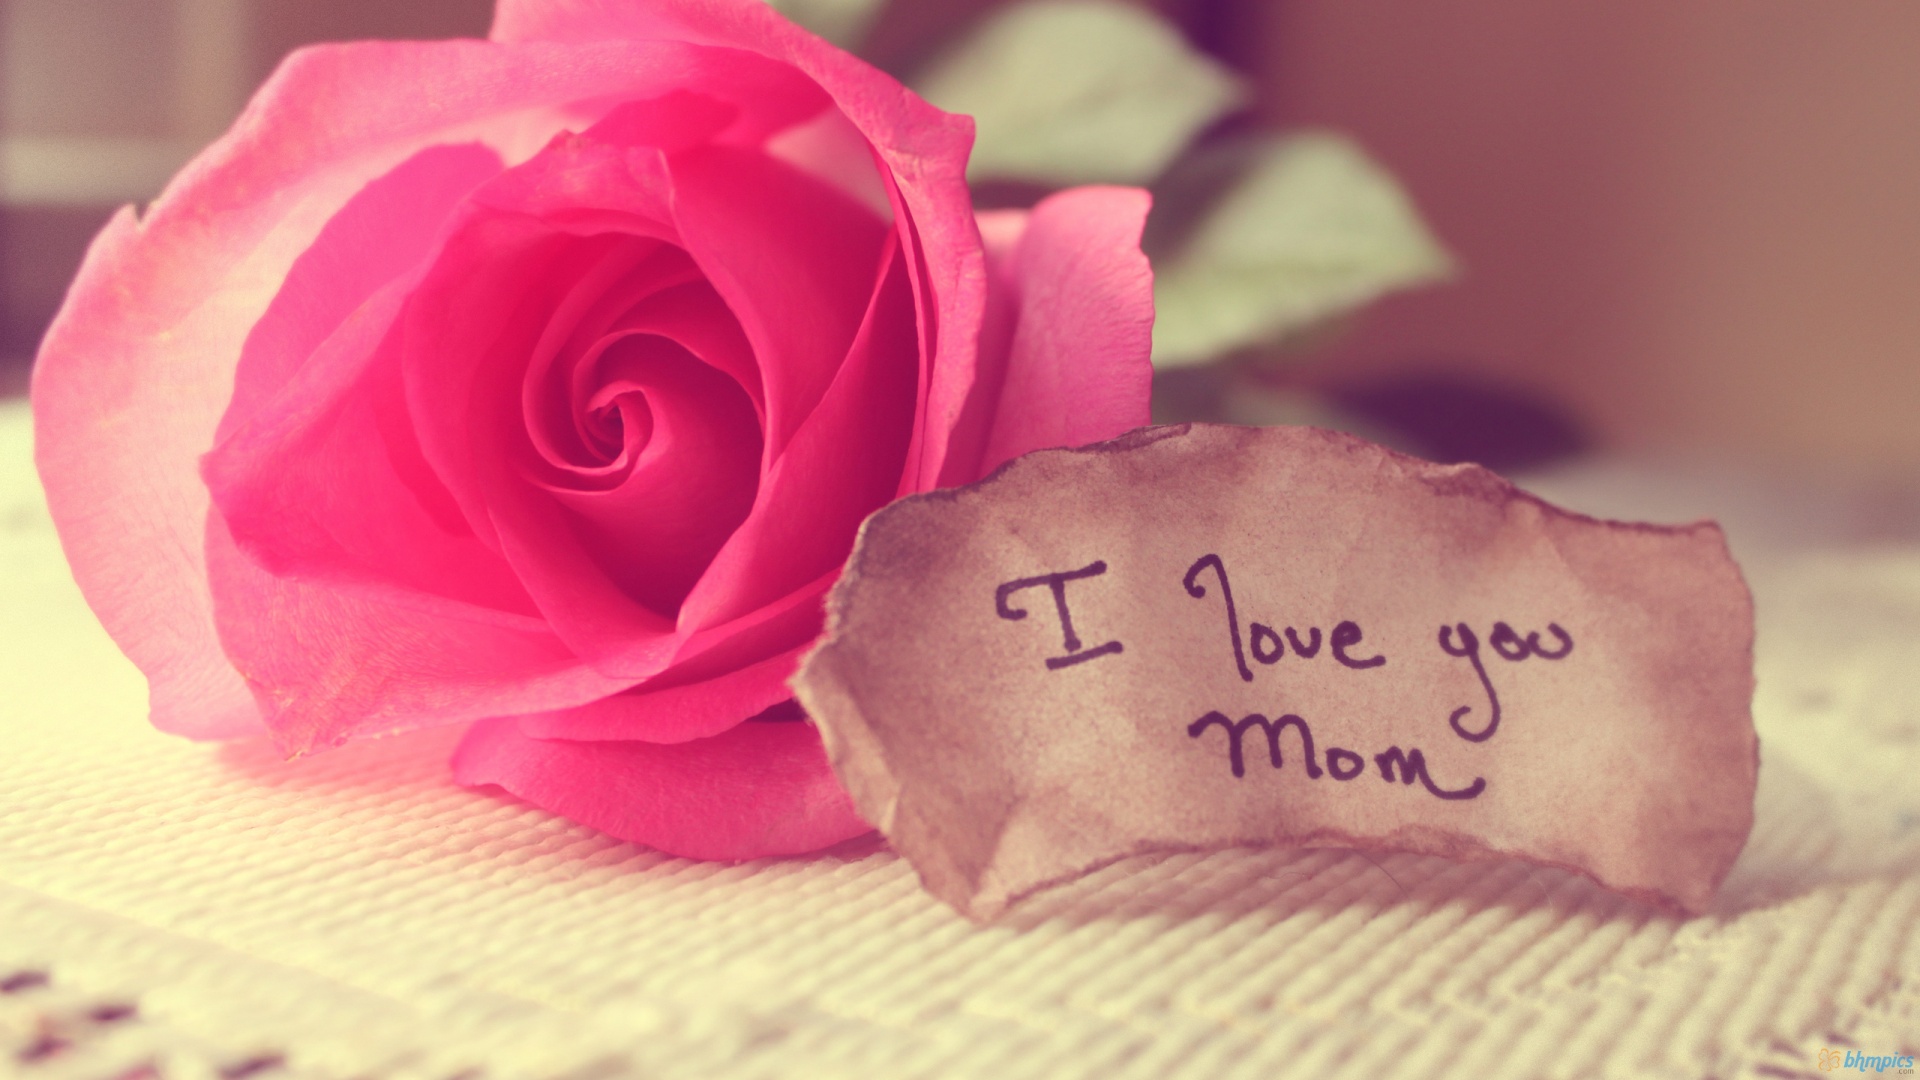 Download Mothers Day I Love You Mom Wallpaper HD 3155 Full Size 1920x1080